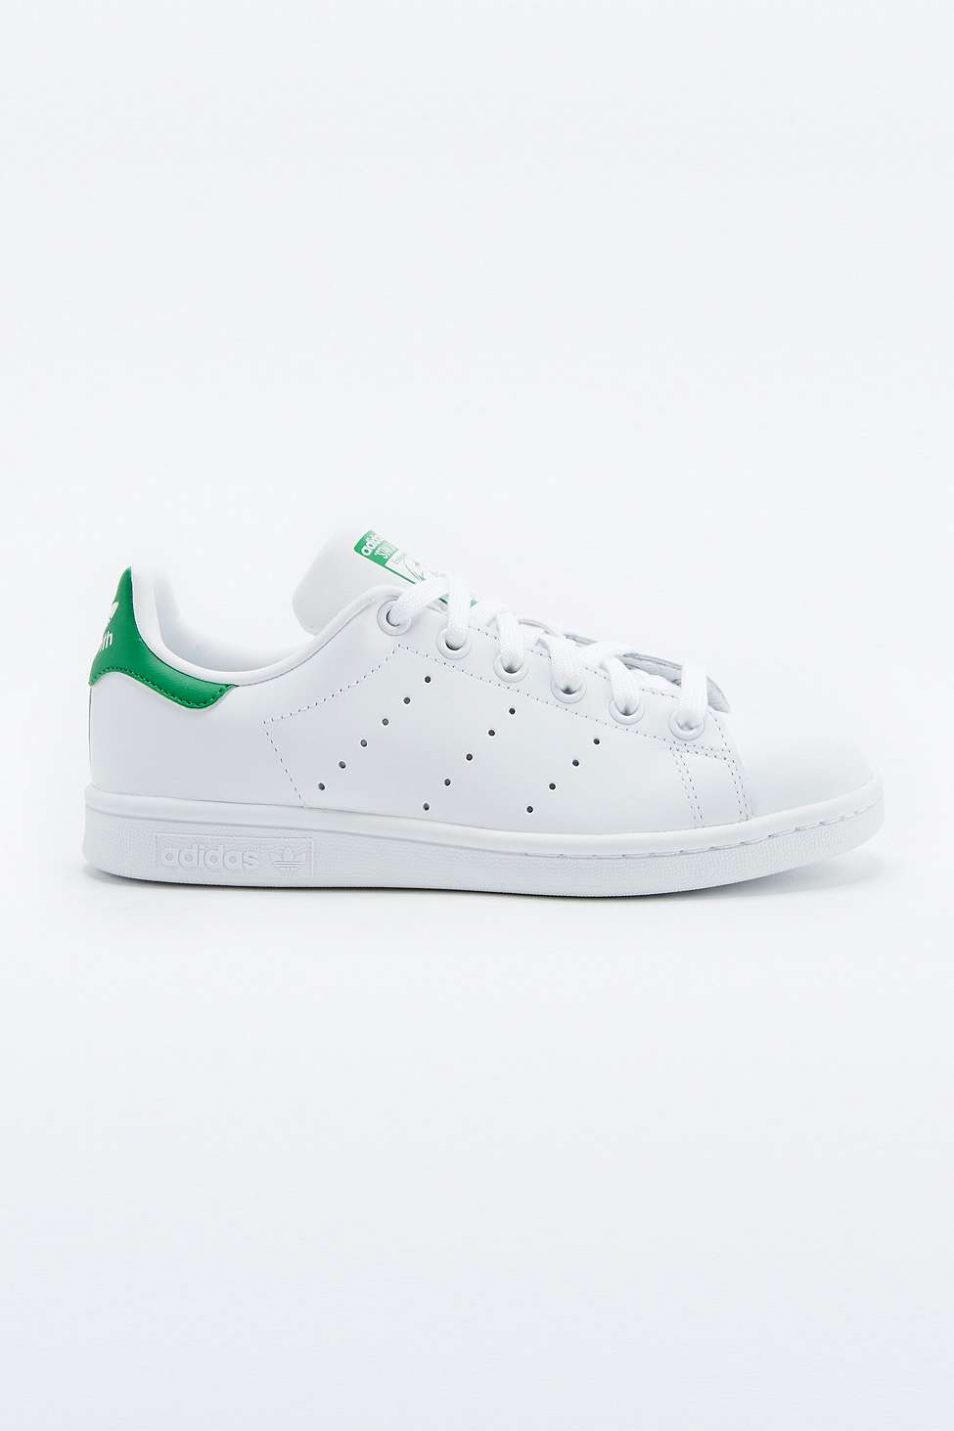 adidas Originals Stan Smith White and Green Trainers 2